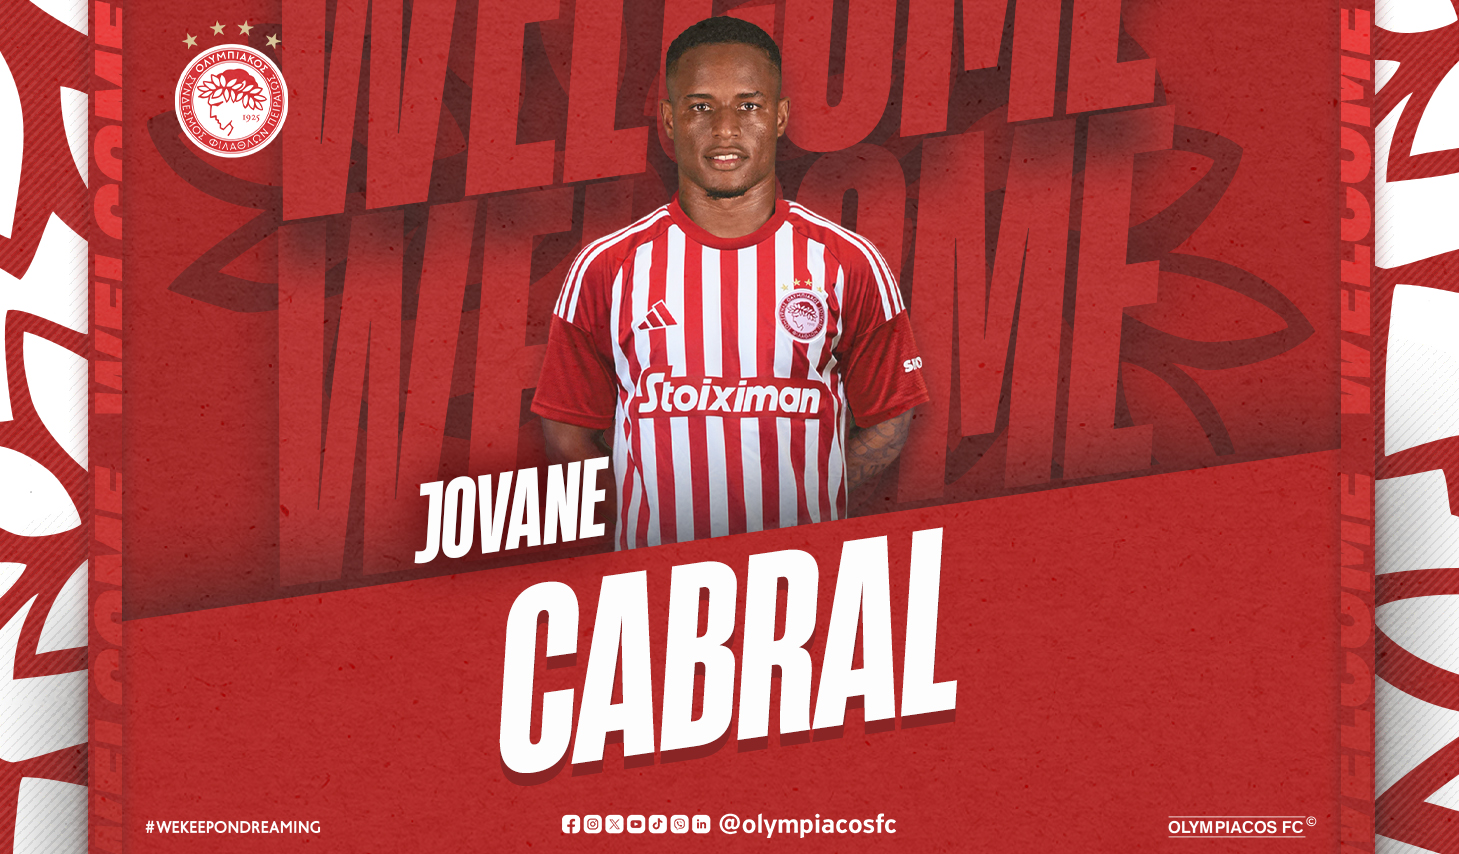 Cabral rejoint l’Olympiacos